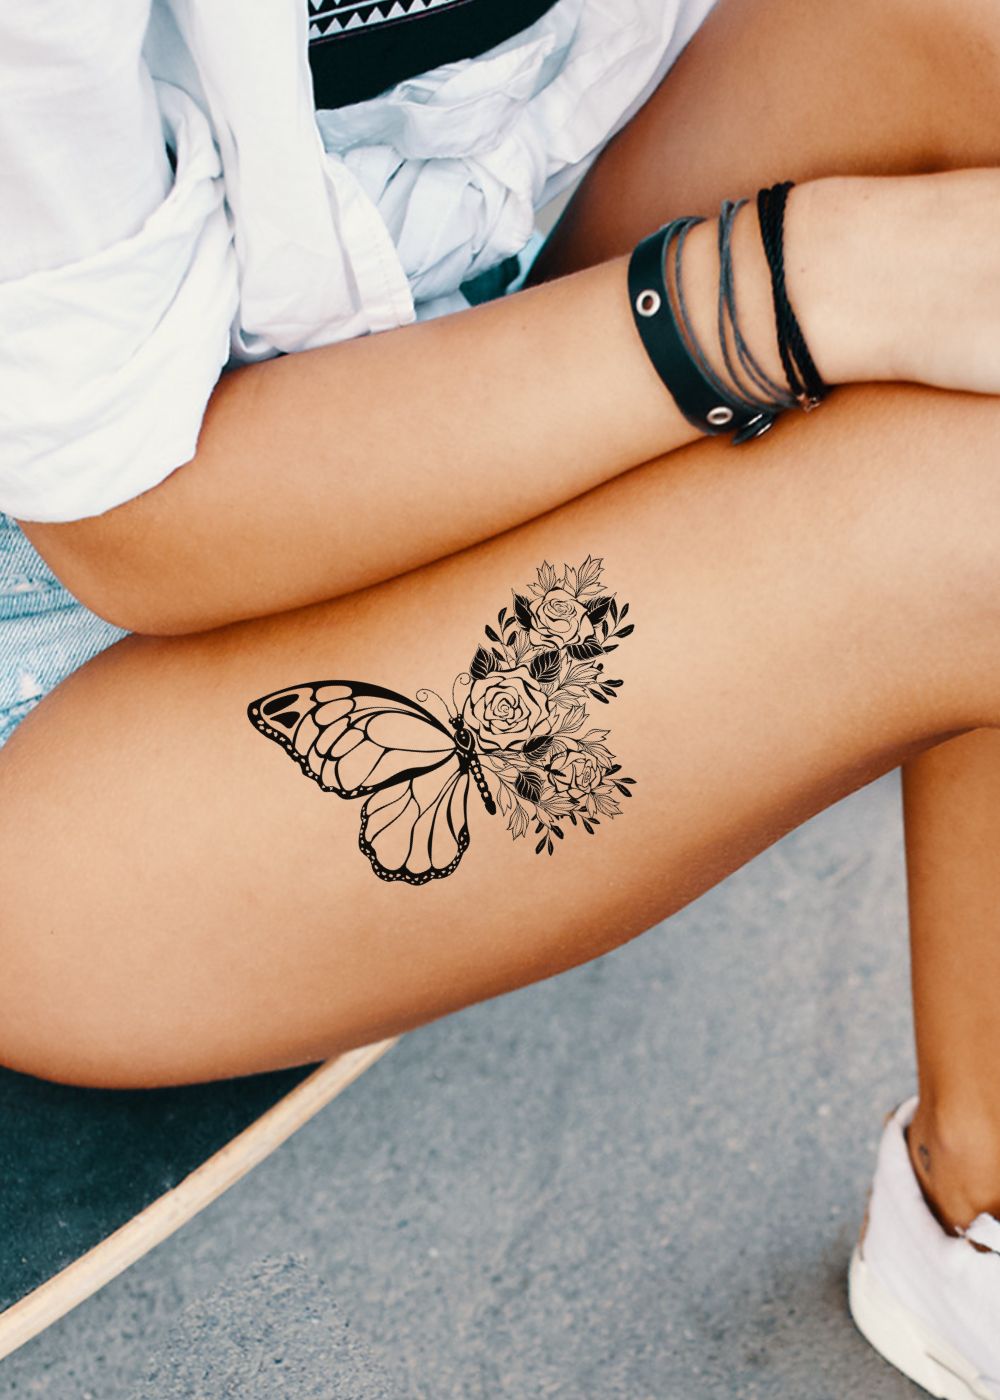 A woman with a butterfly tattoo on her thigh.